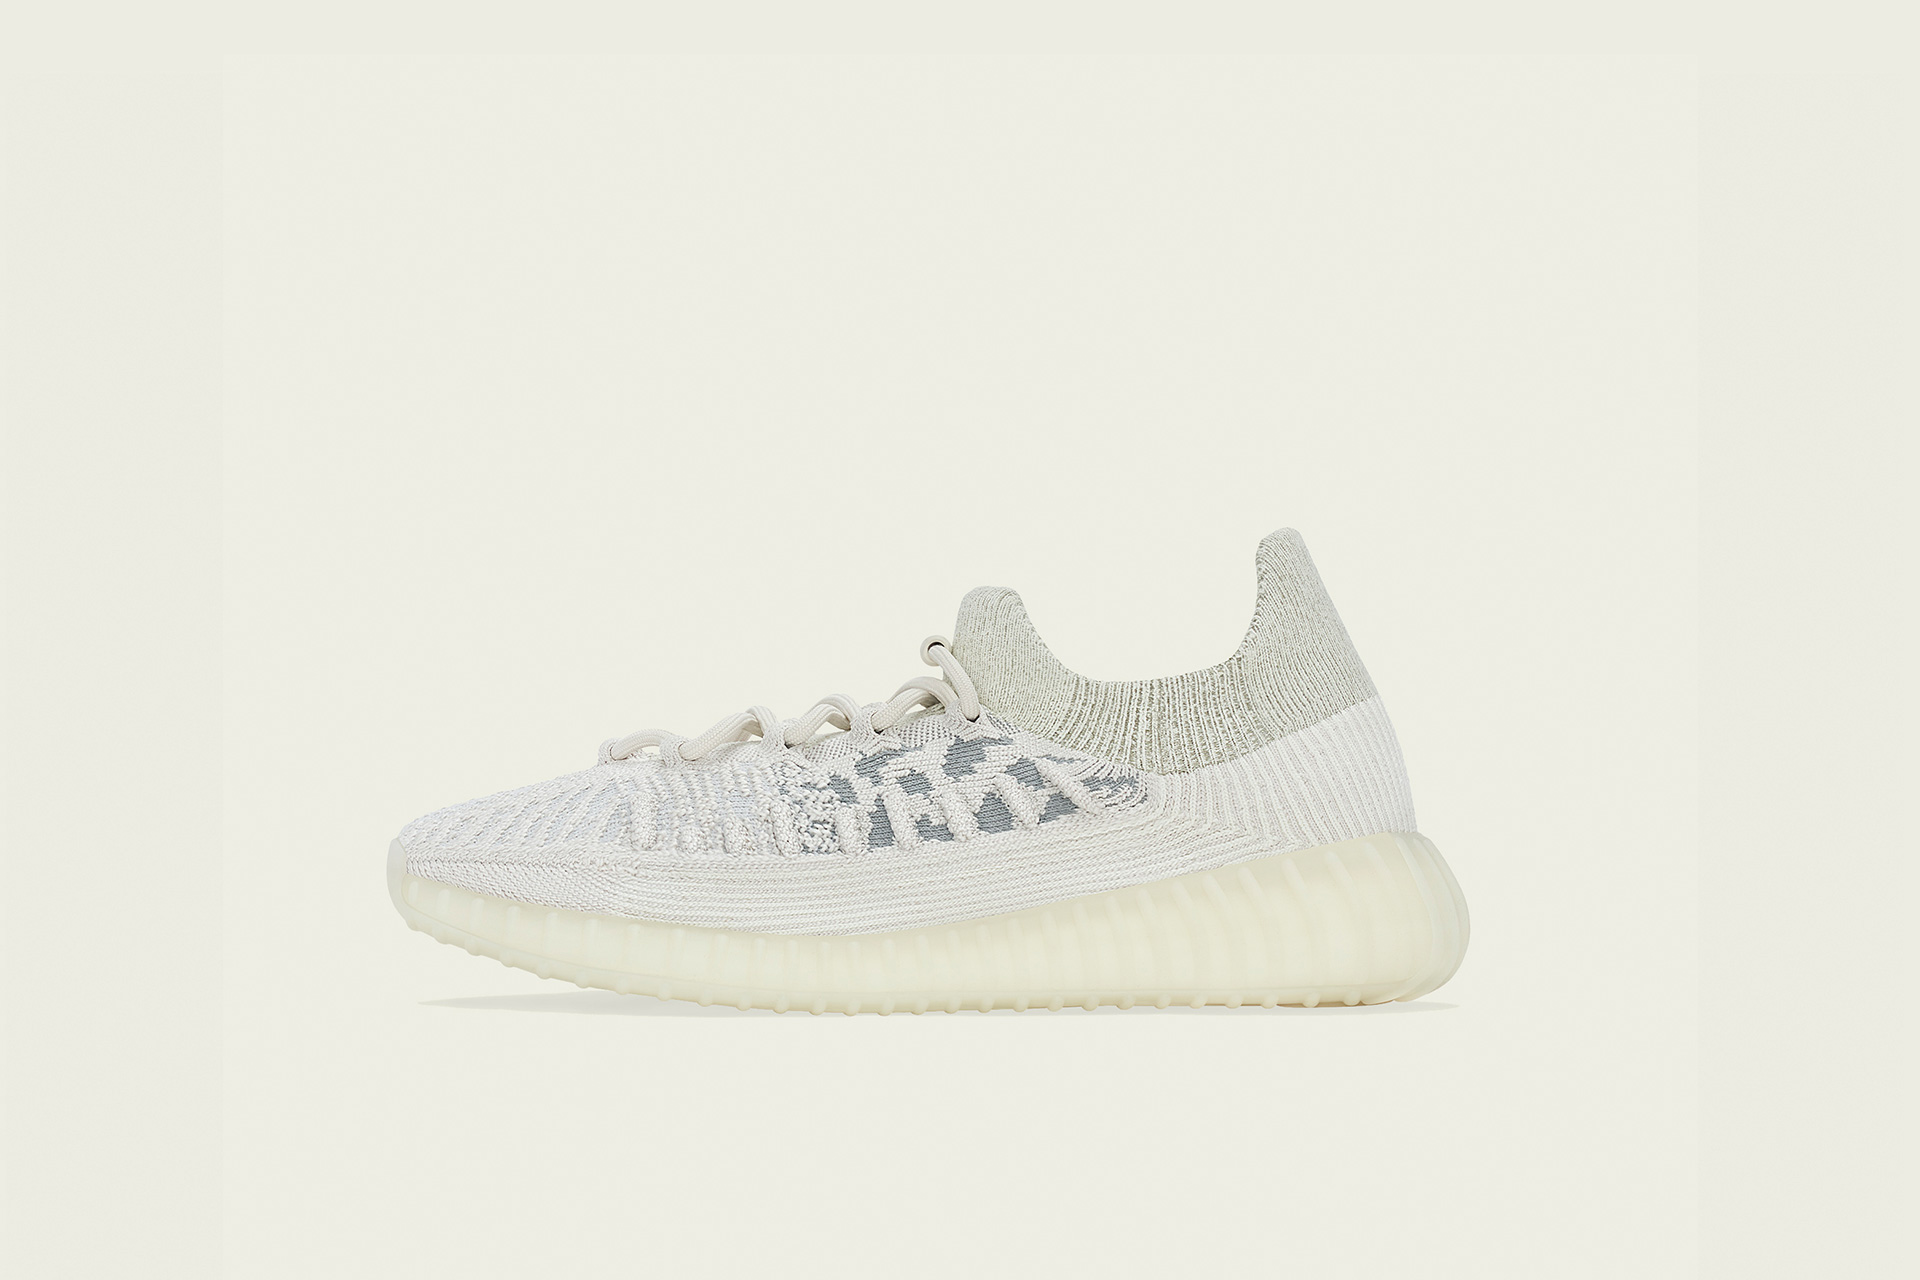 YEEZY: Off-White Yzy 350 V2 CMPCT Sneakers